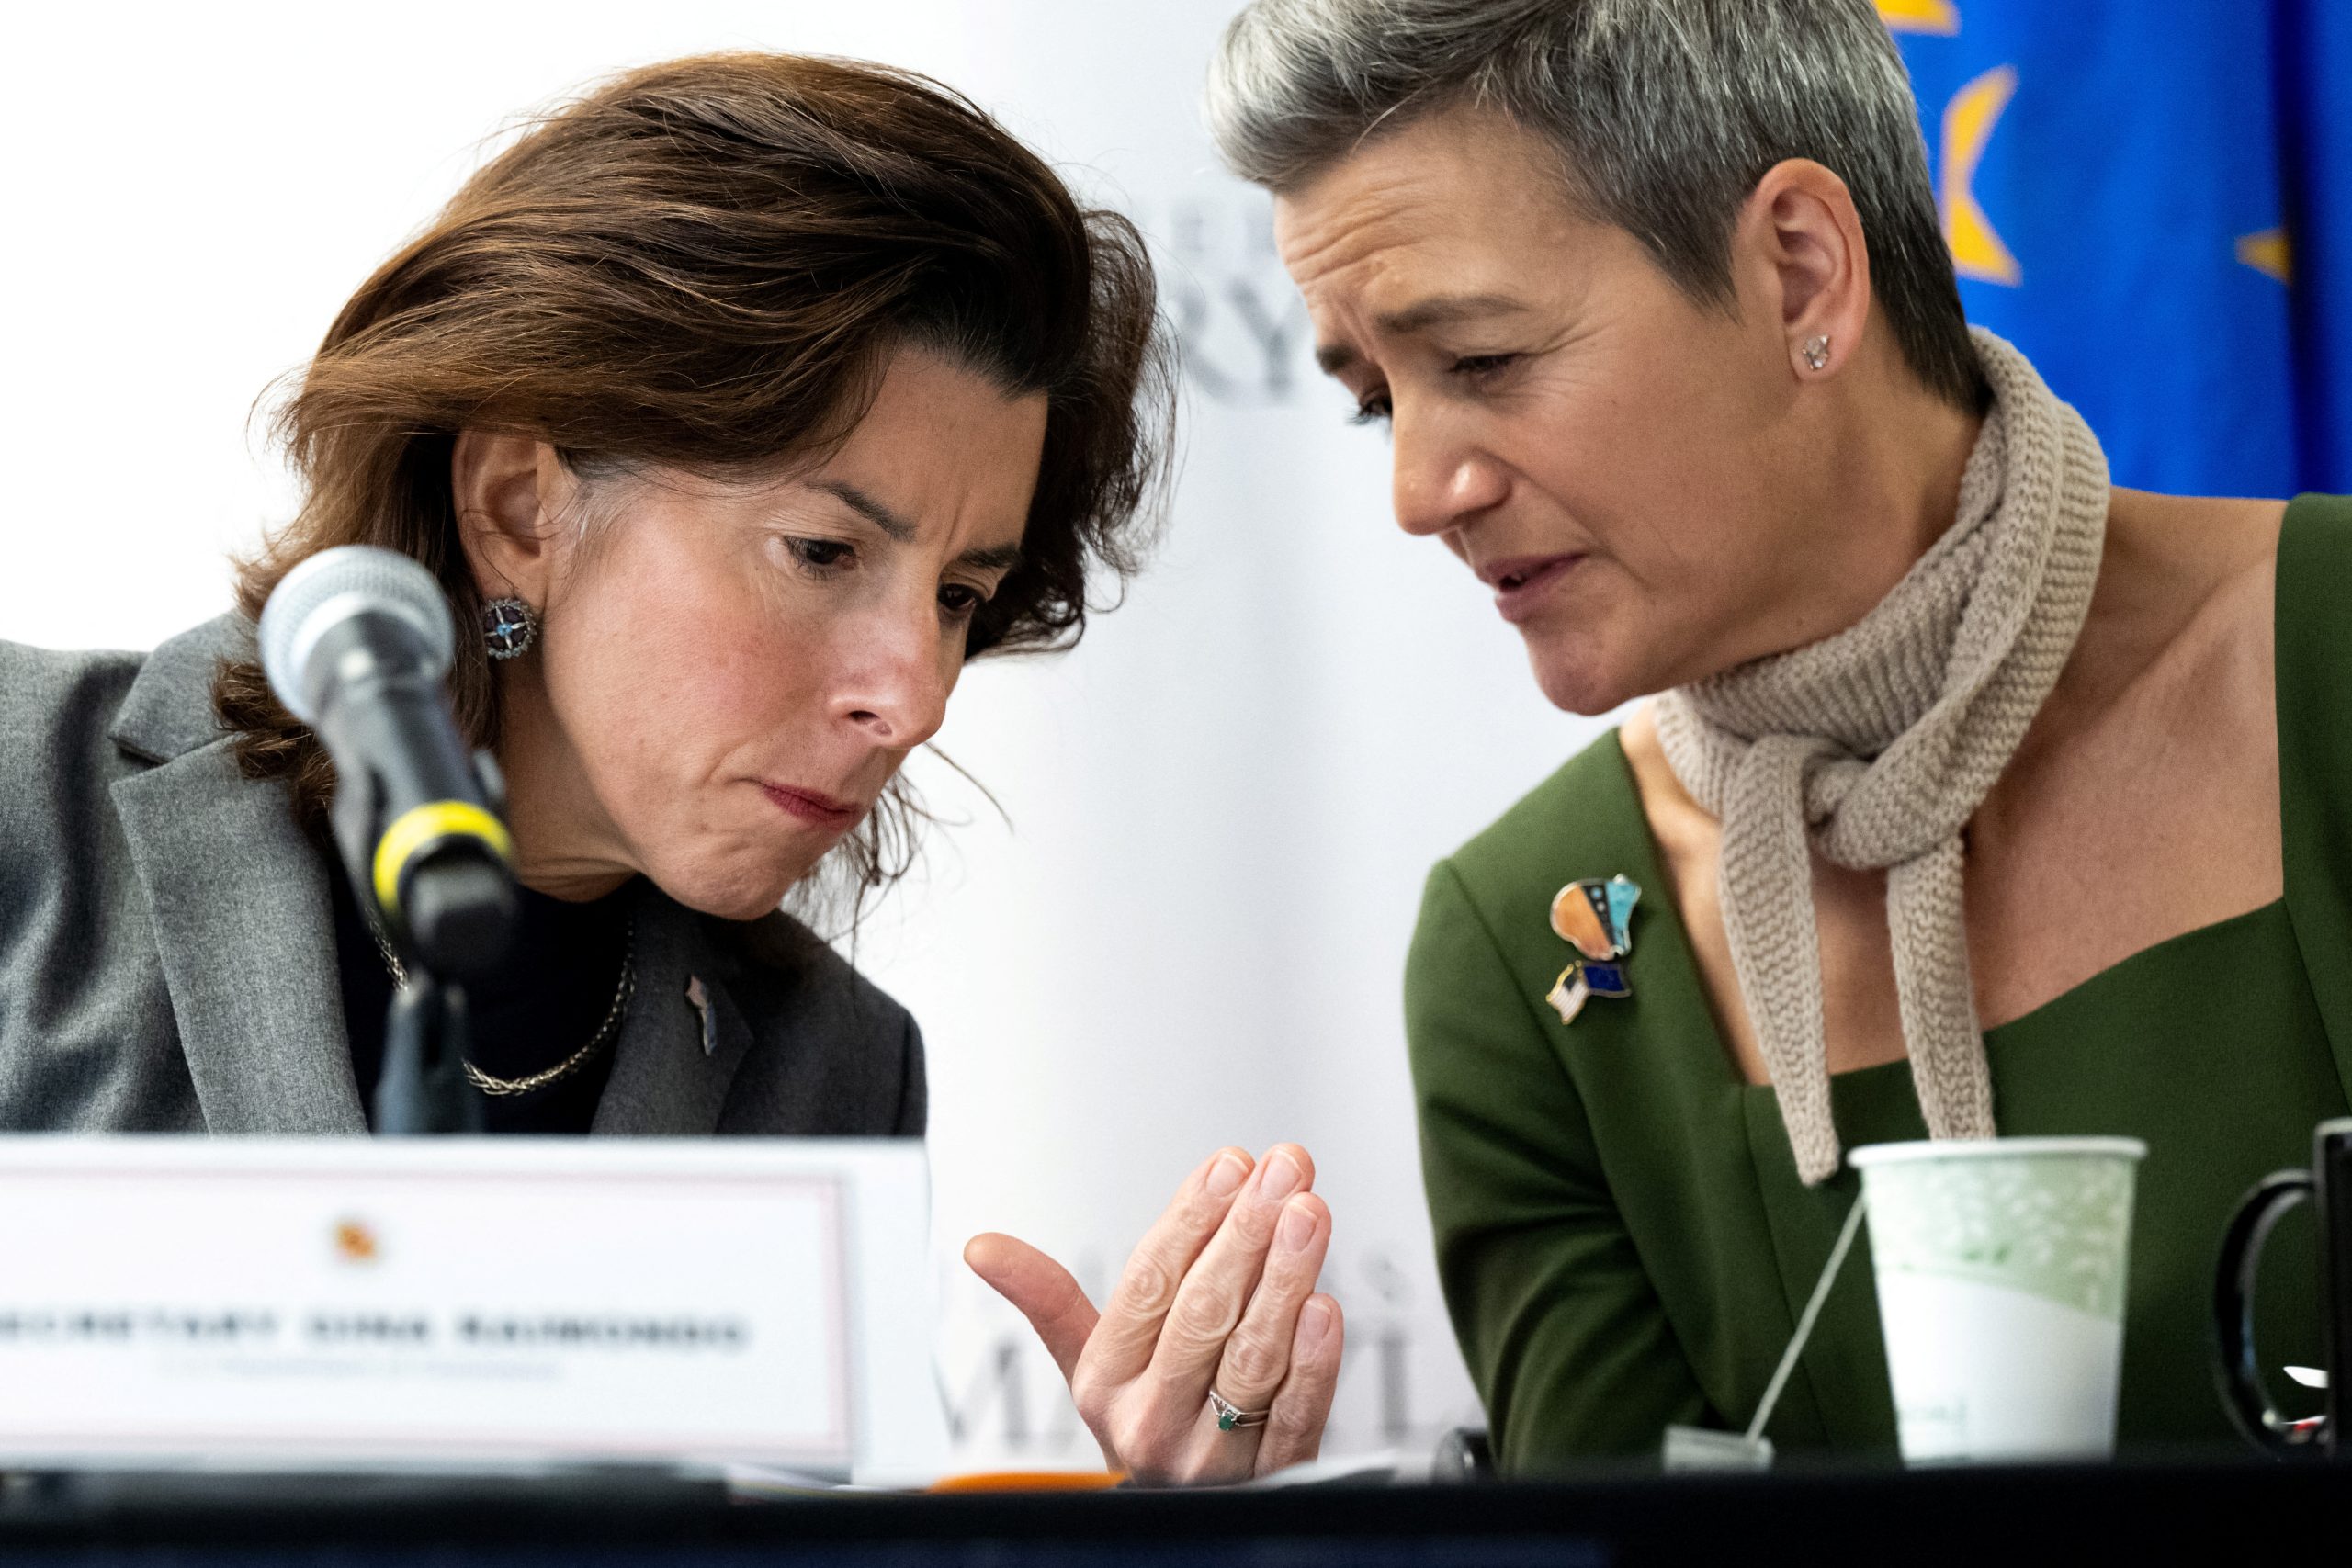 Photo: US Secretary of Commerce Gina Raimondo and European Commission Executive Vice-President Margrethe Vestager participate in a US - EU Trade and Technology Council (TTC) Ministerial Meeting, December 5, 2022. Credit: Saul Loeb/Pool via REUTERS